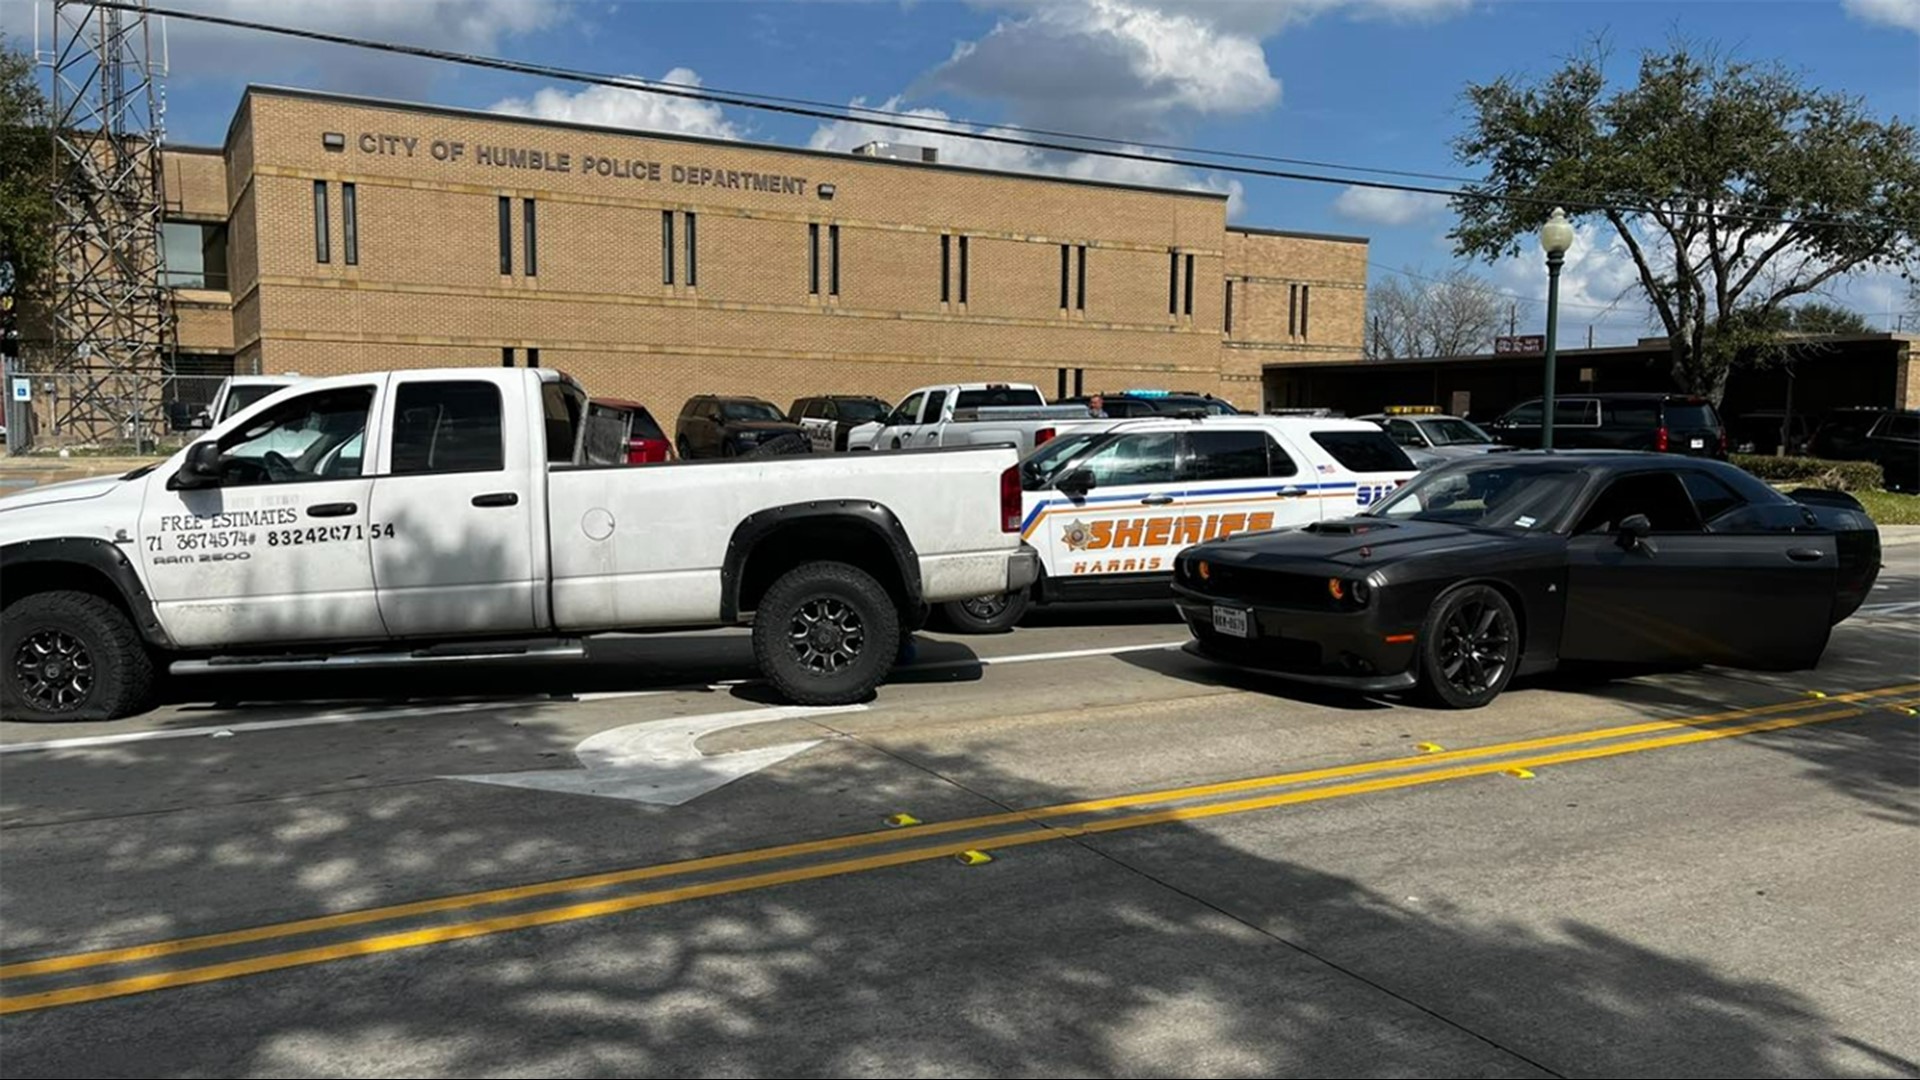 Humble police said family members were chasing a truck that had been stolen from them when it blew both front tires and stopped in front of police headquarters.